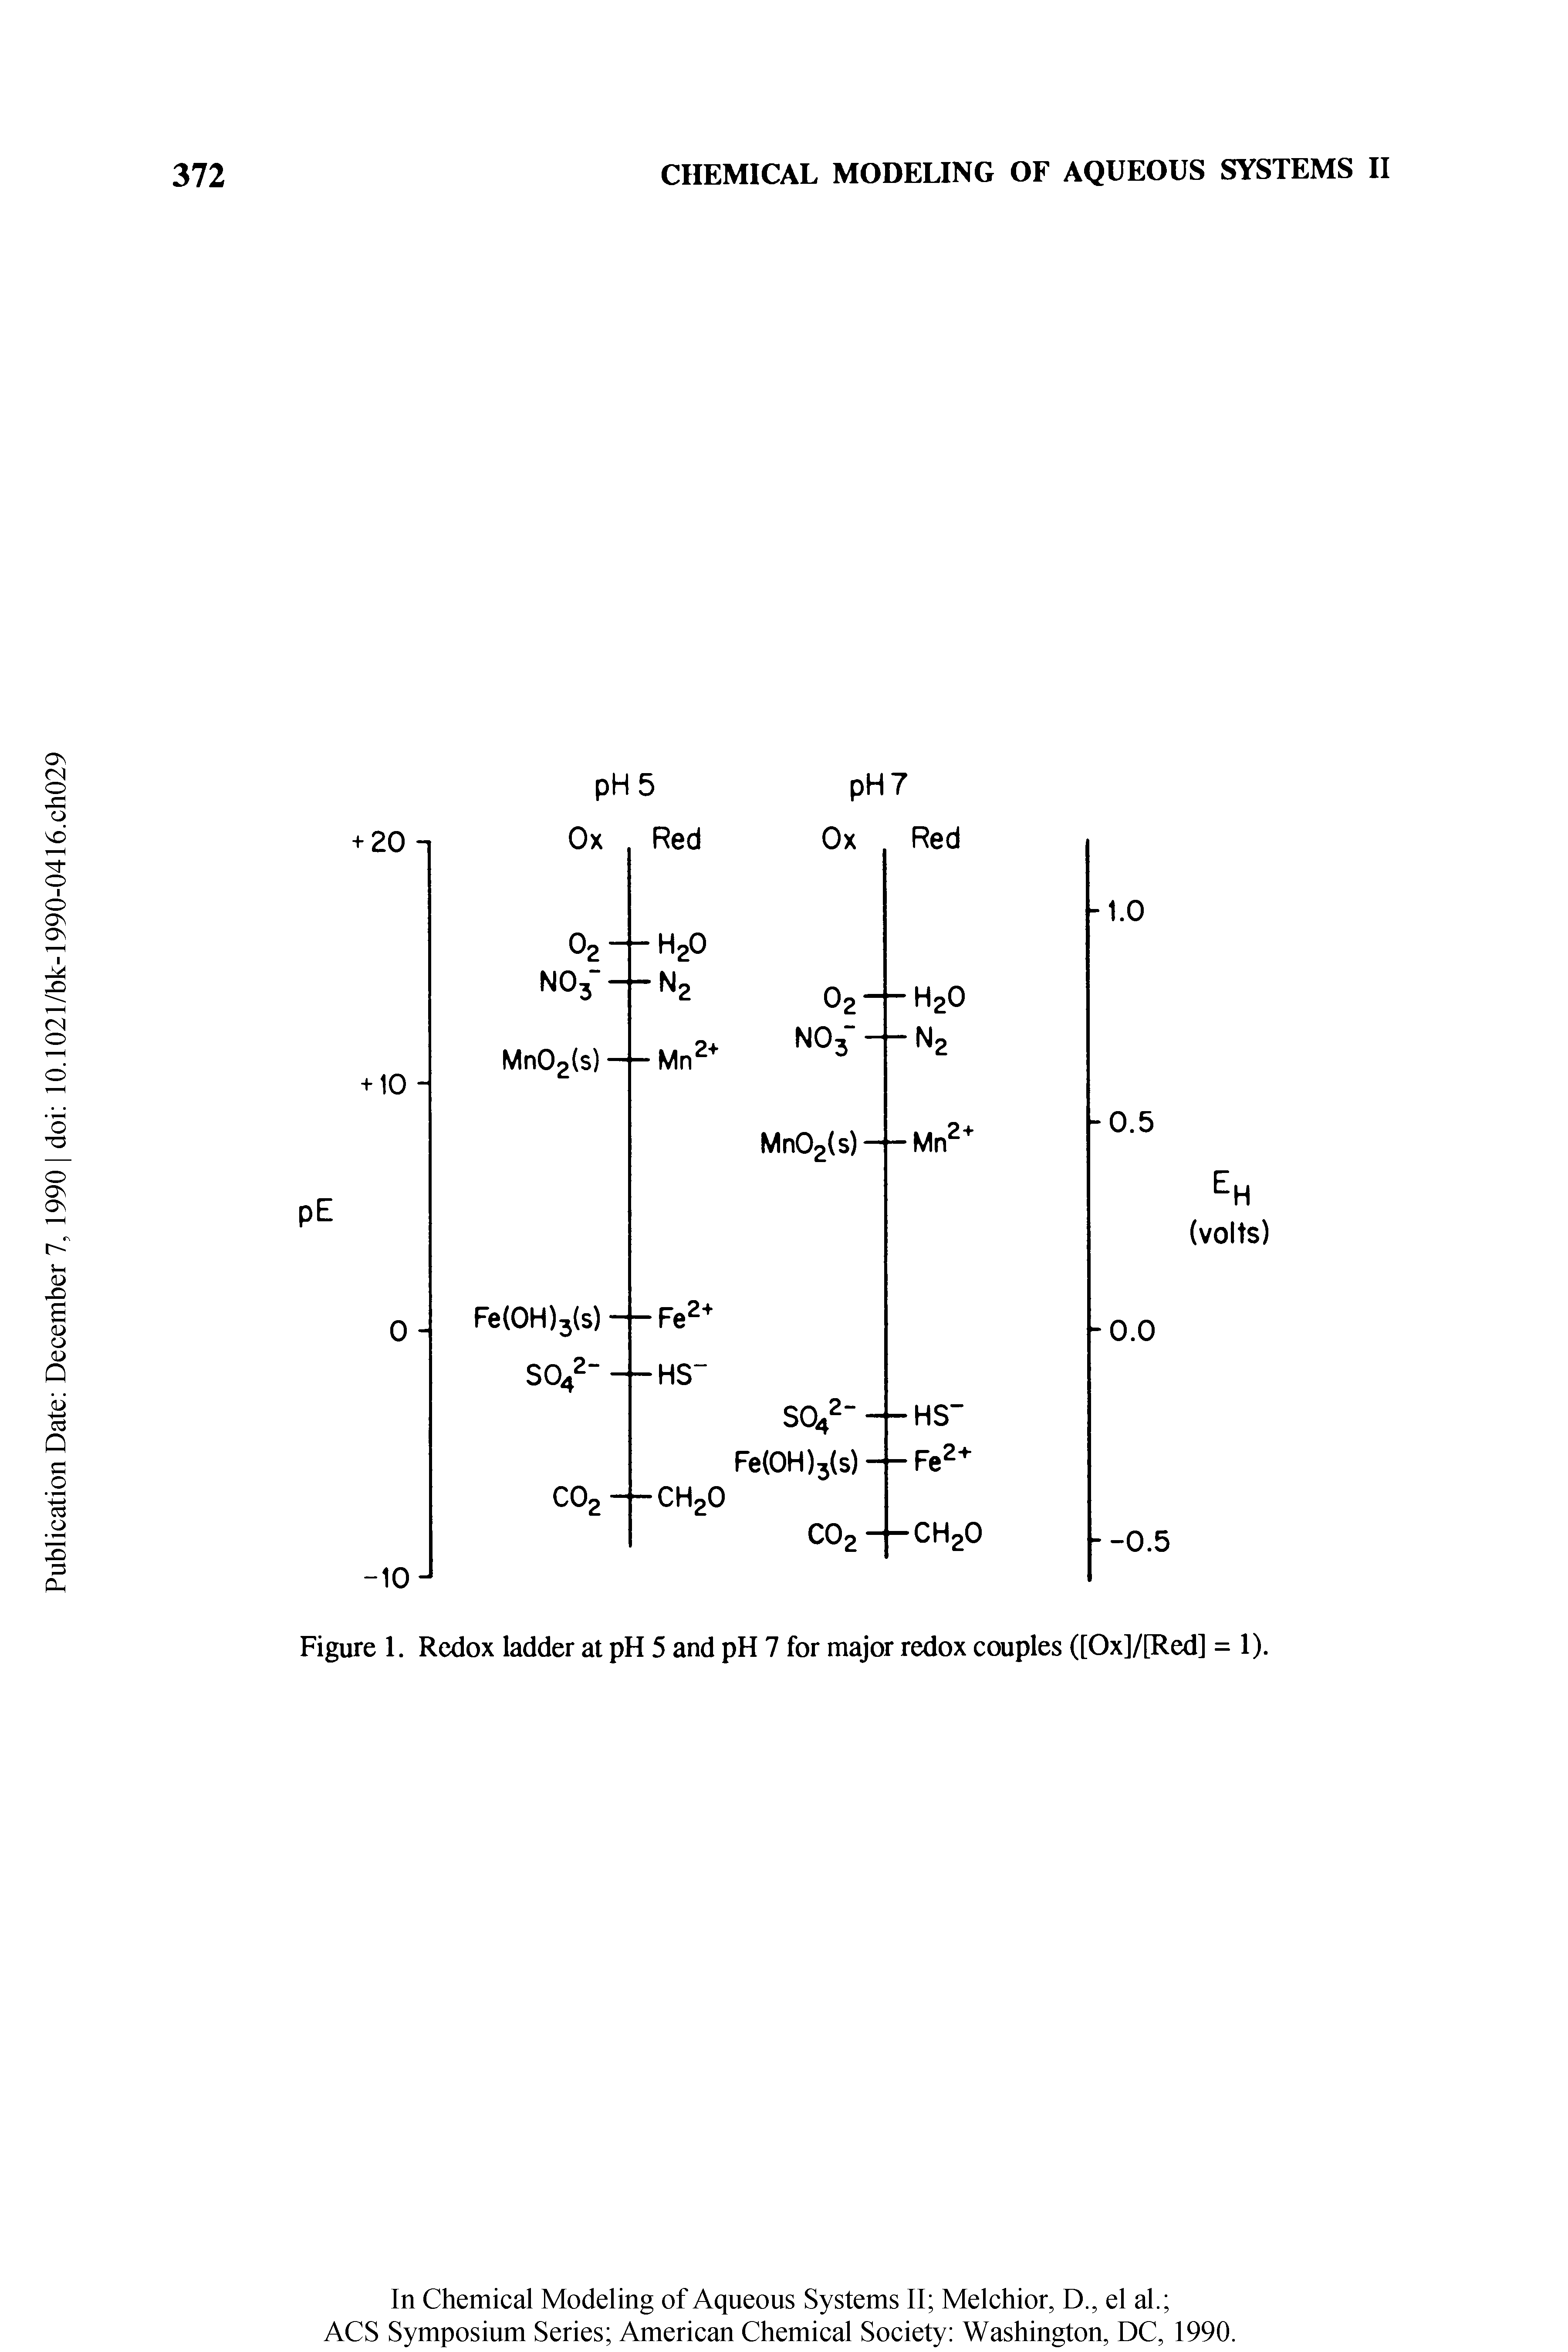 Figure 1. Redox ladder at pH 5 and pH 7 for major redox couples ([Ox]/[Red] = 1).